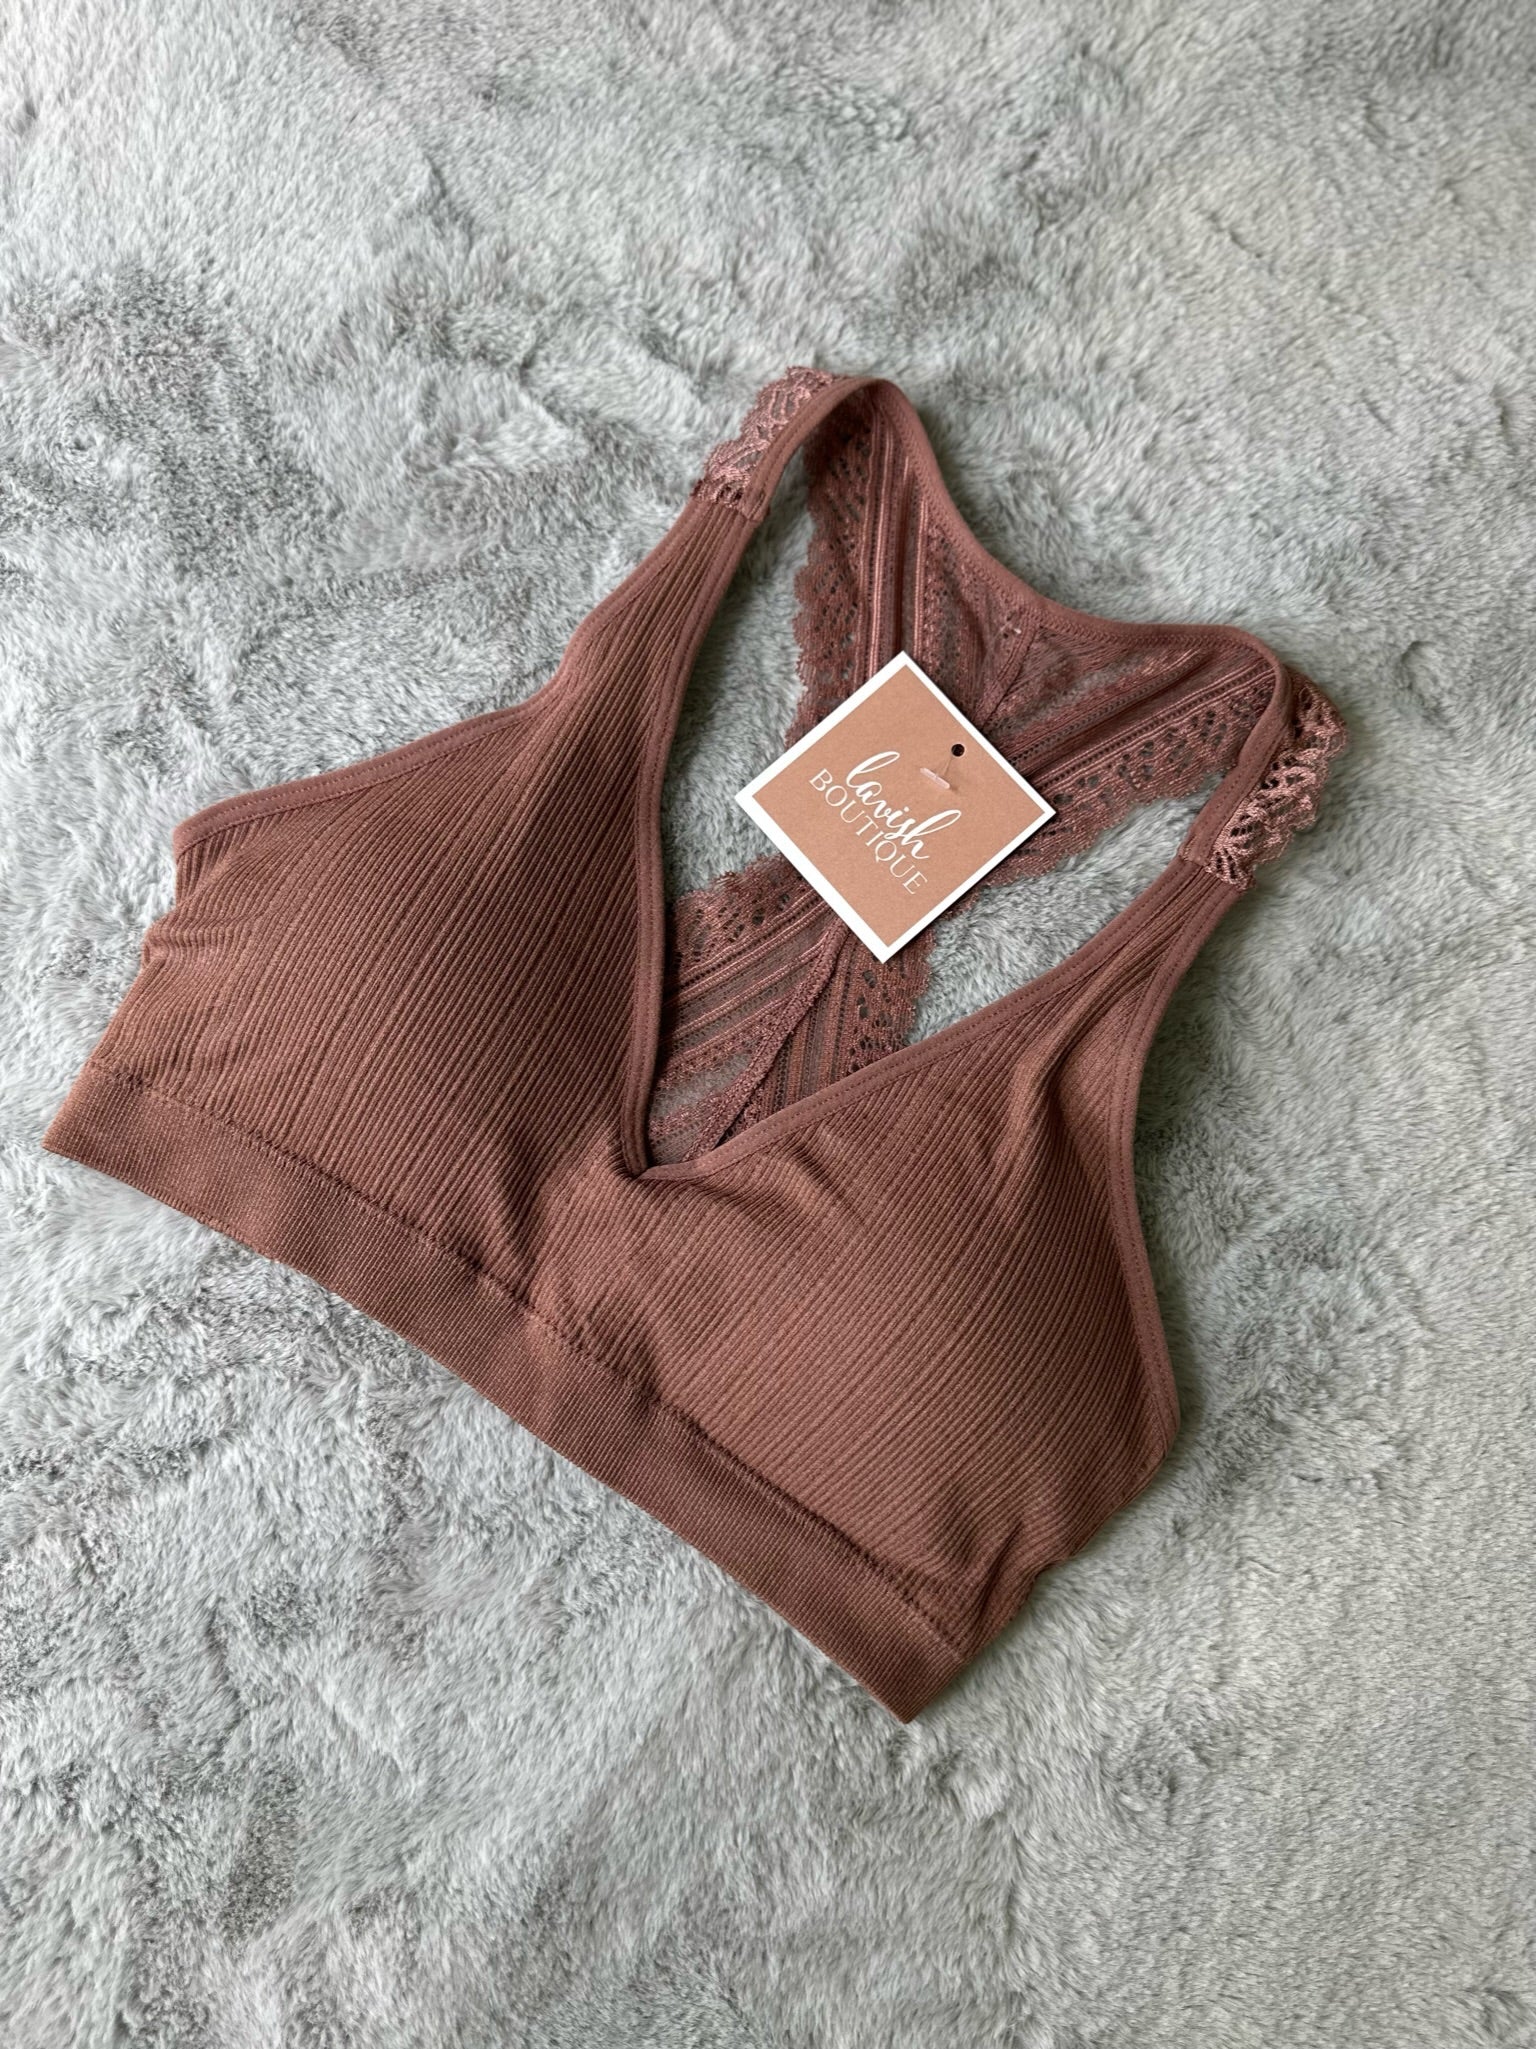 Racerback Bralette with Lace Detail